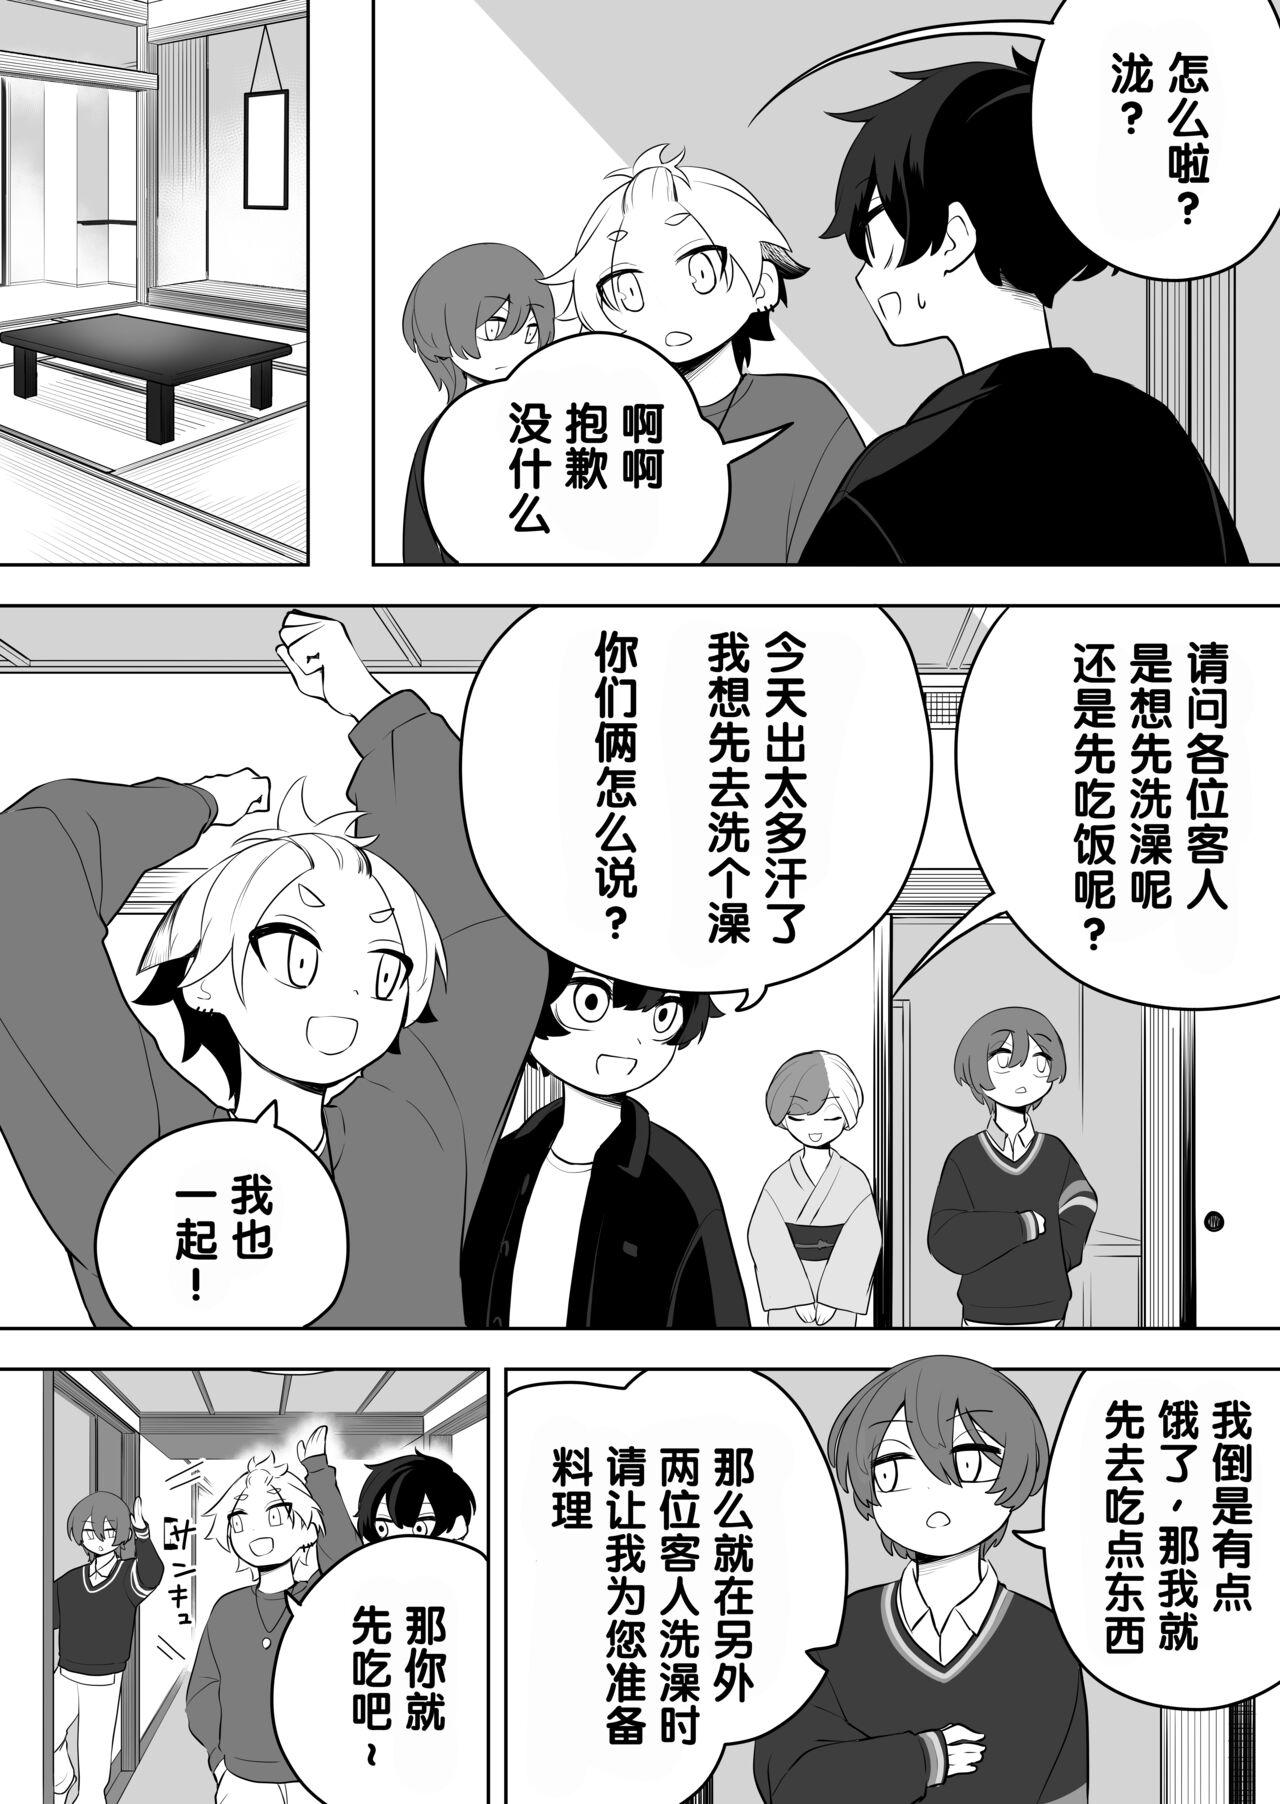 Family Roleplay 猫山怪闻 Spoon - Page 6